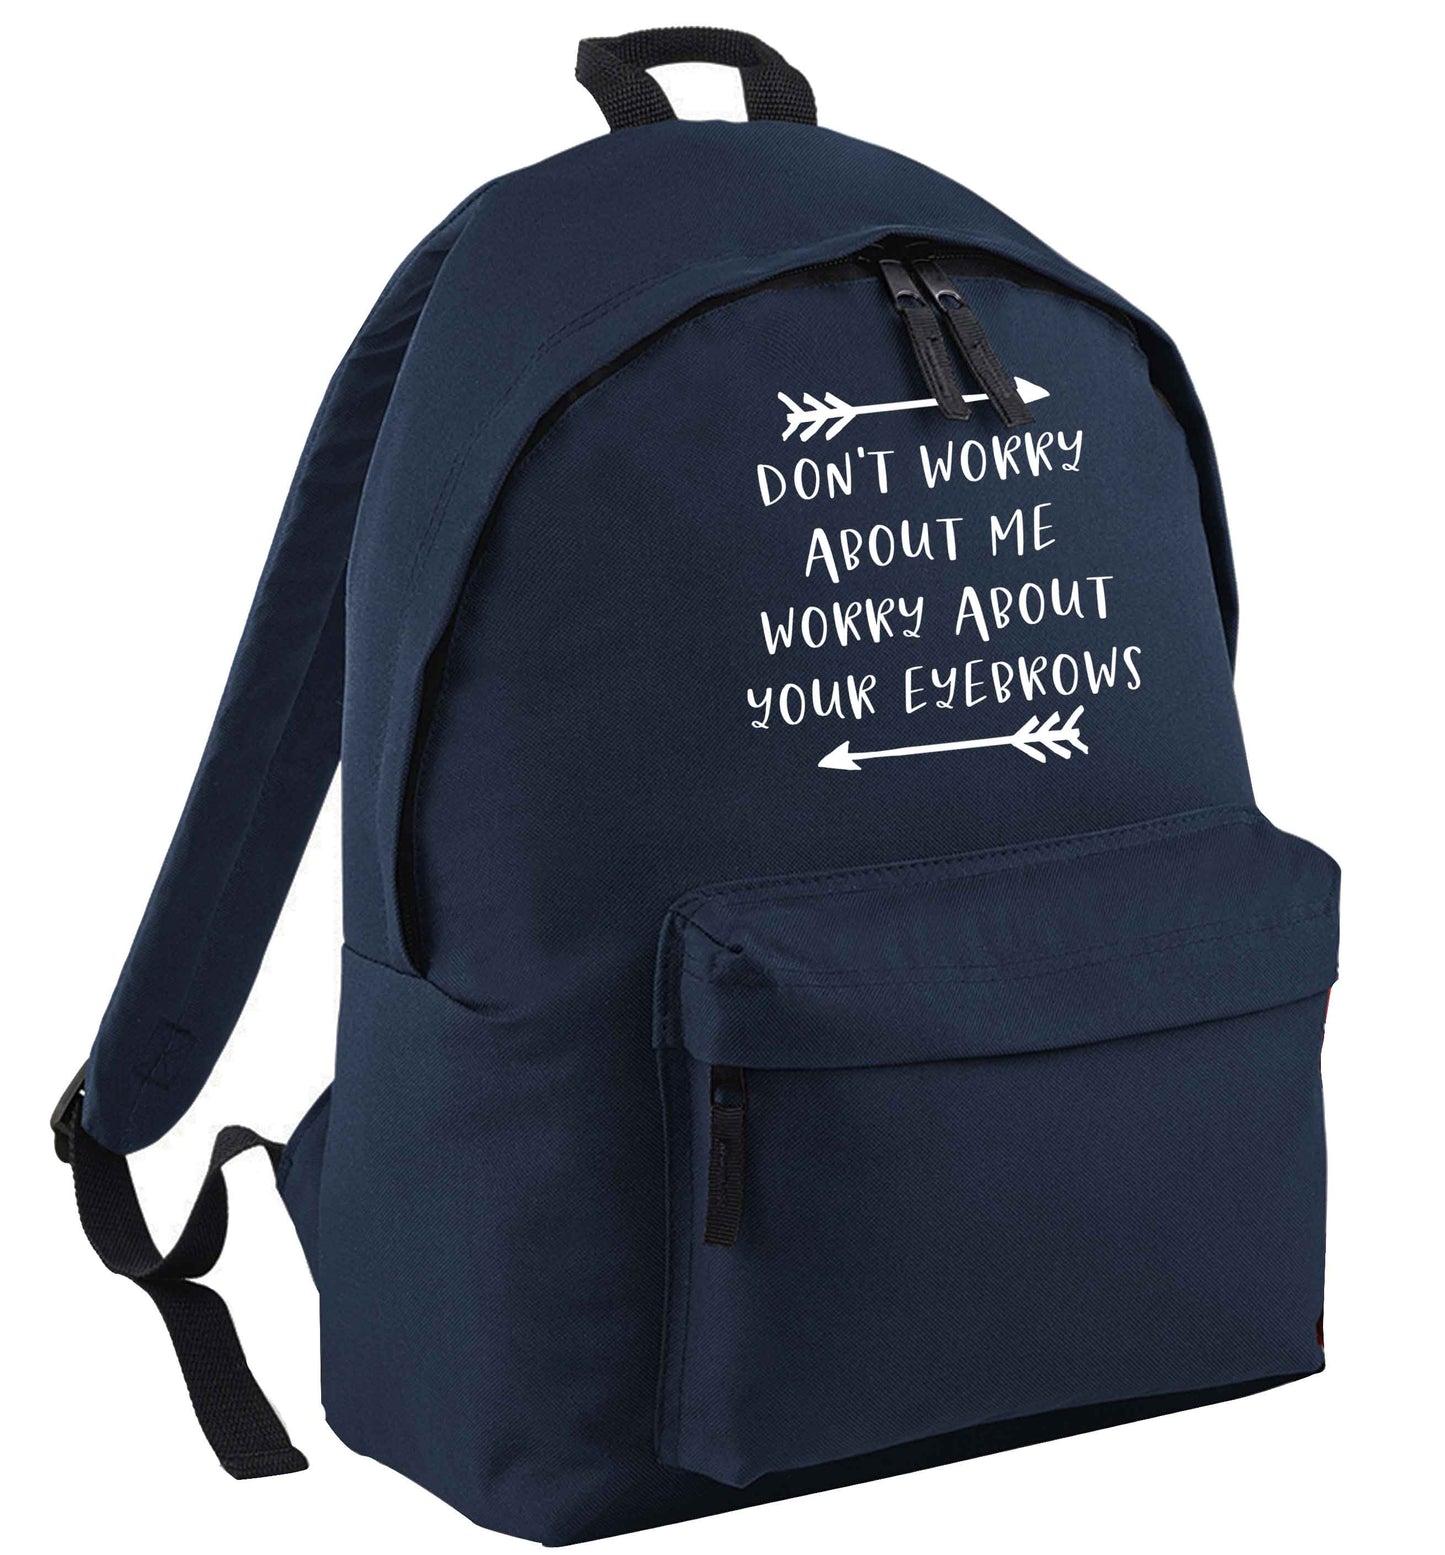 Don't worry about me worry about your eyebrows navy adults backpack